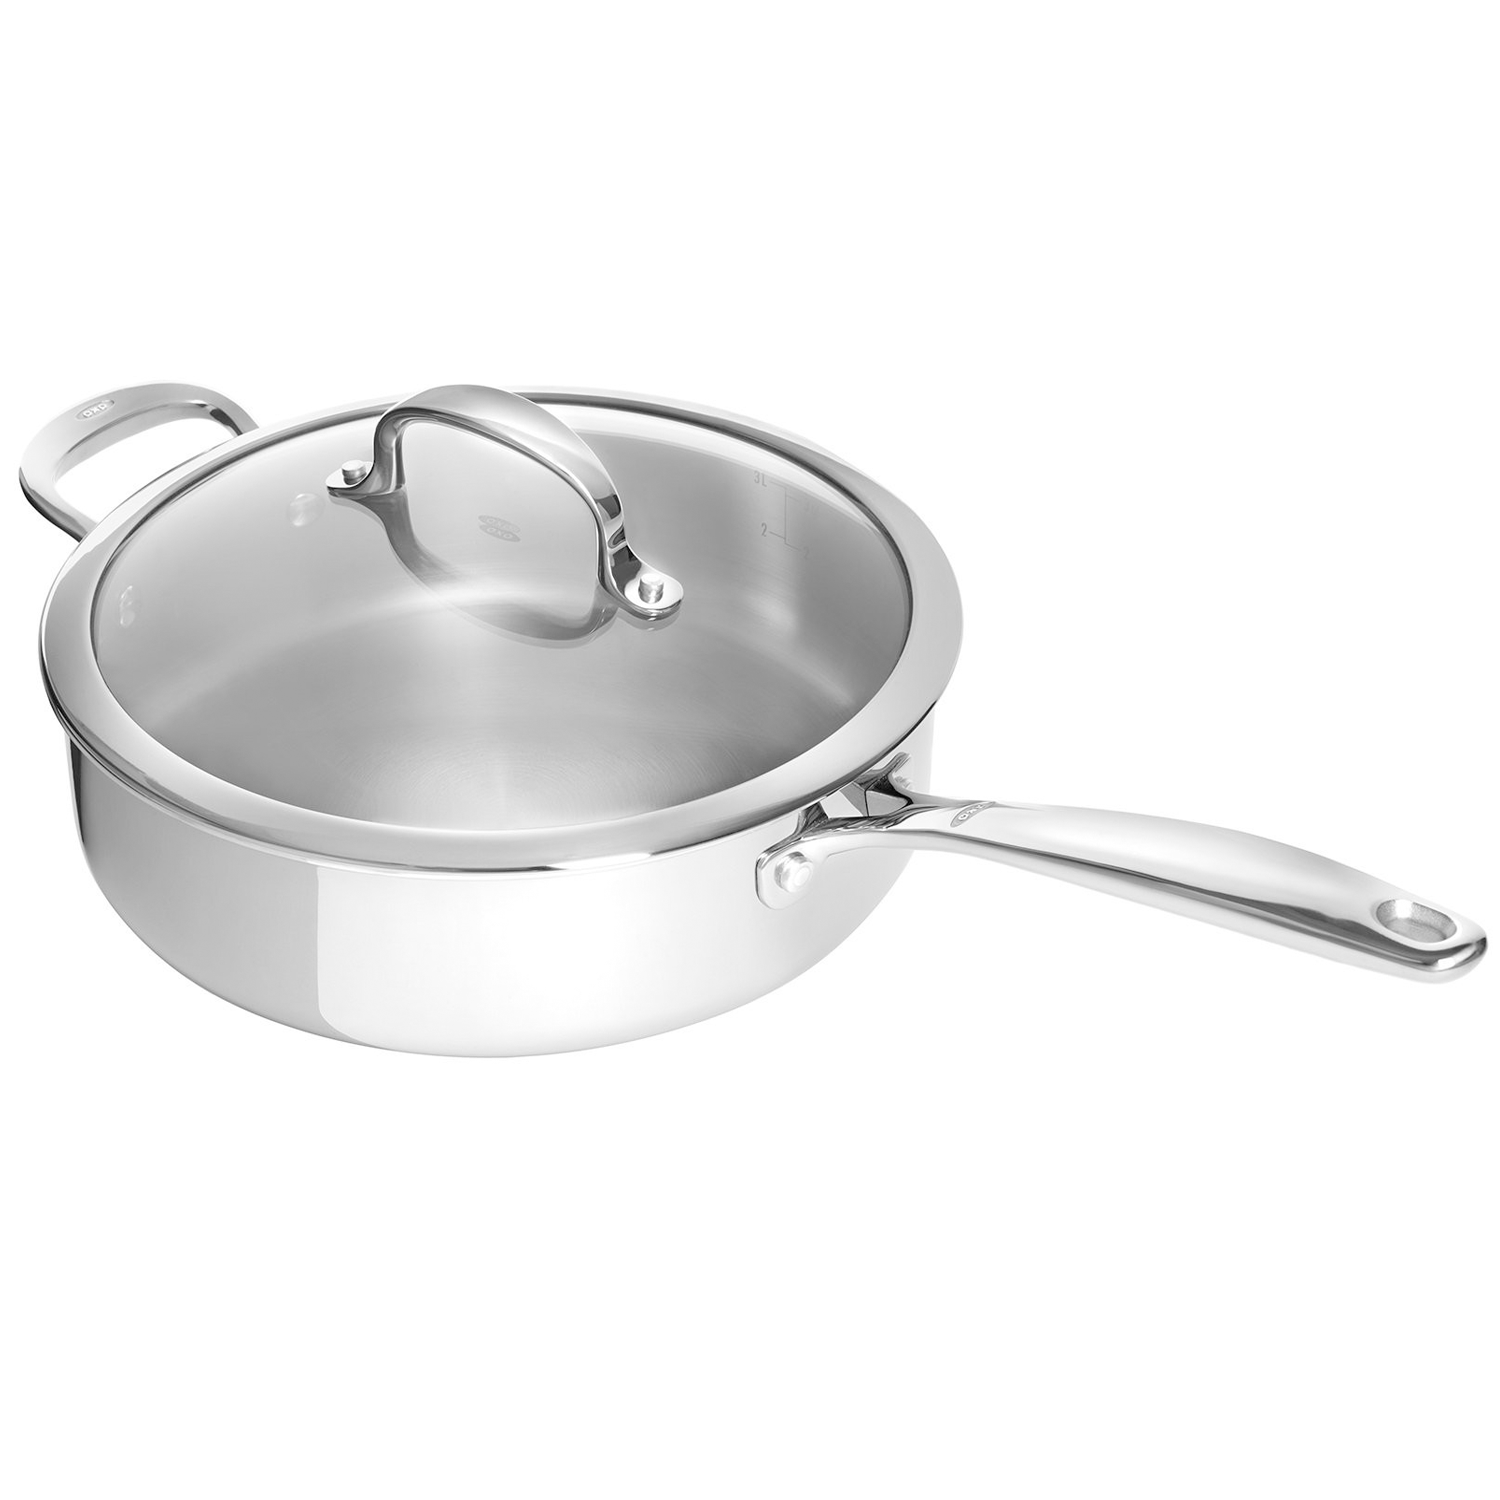  OXO Good Grips Pro 12 Frying Pan Skillet with Lid, 3